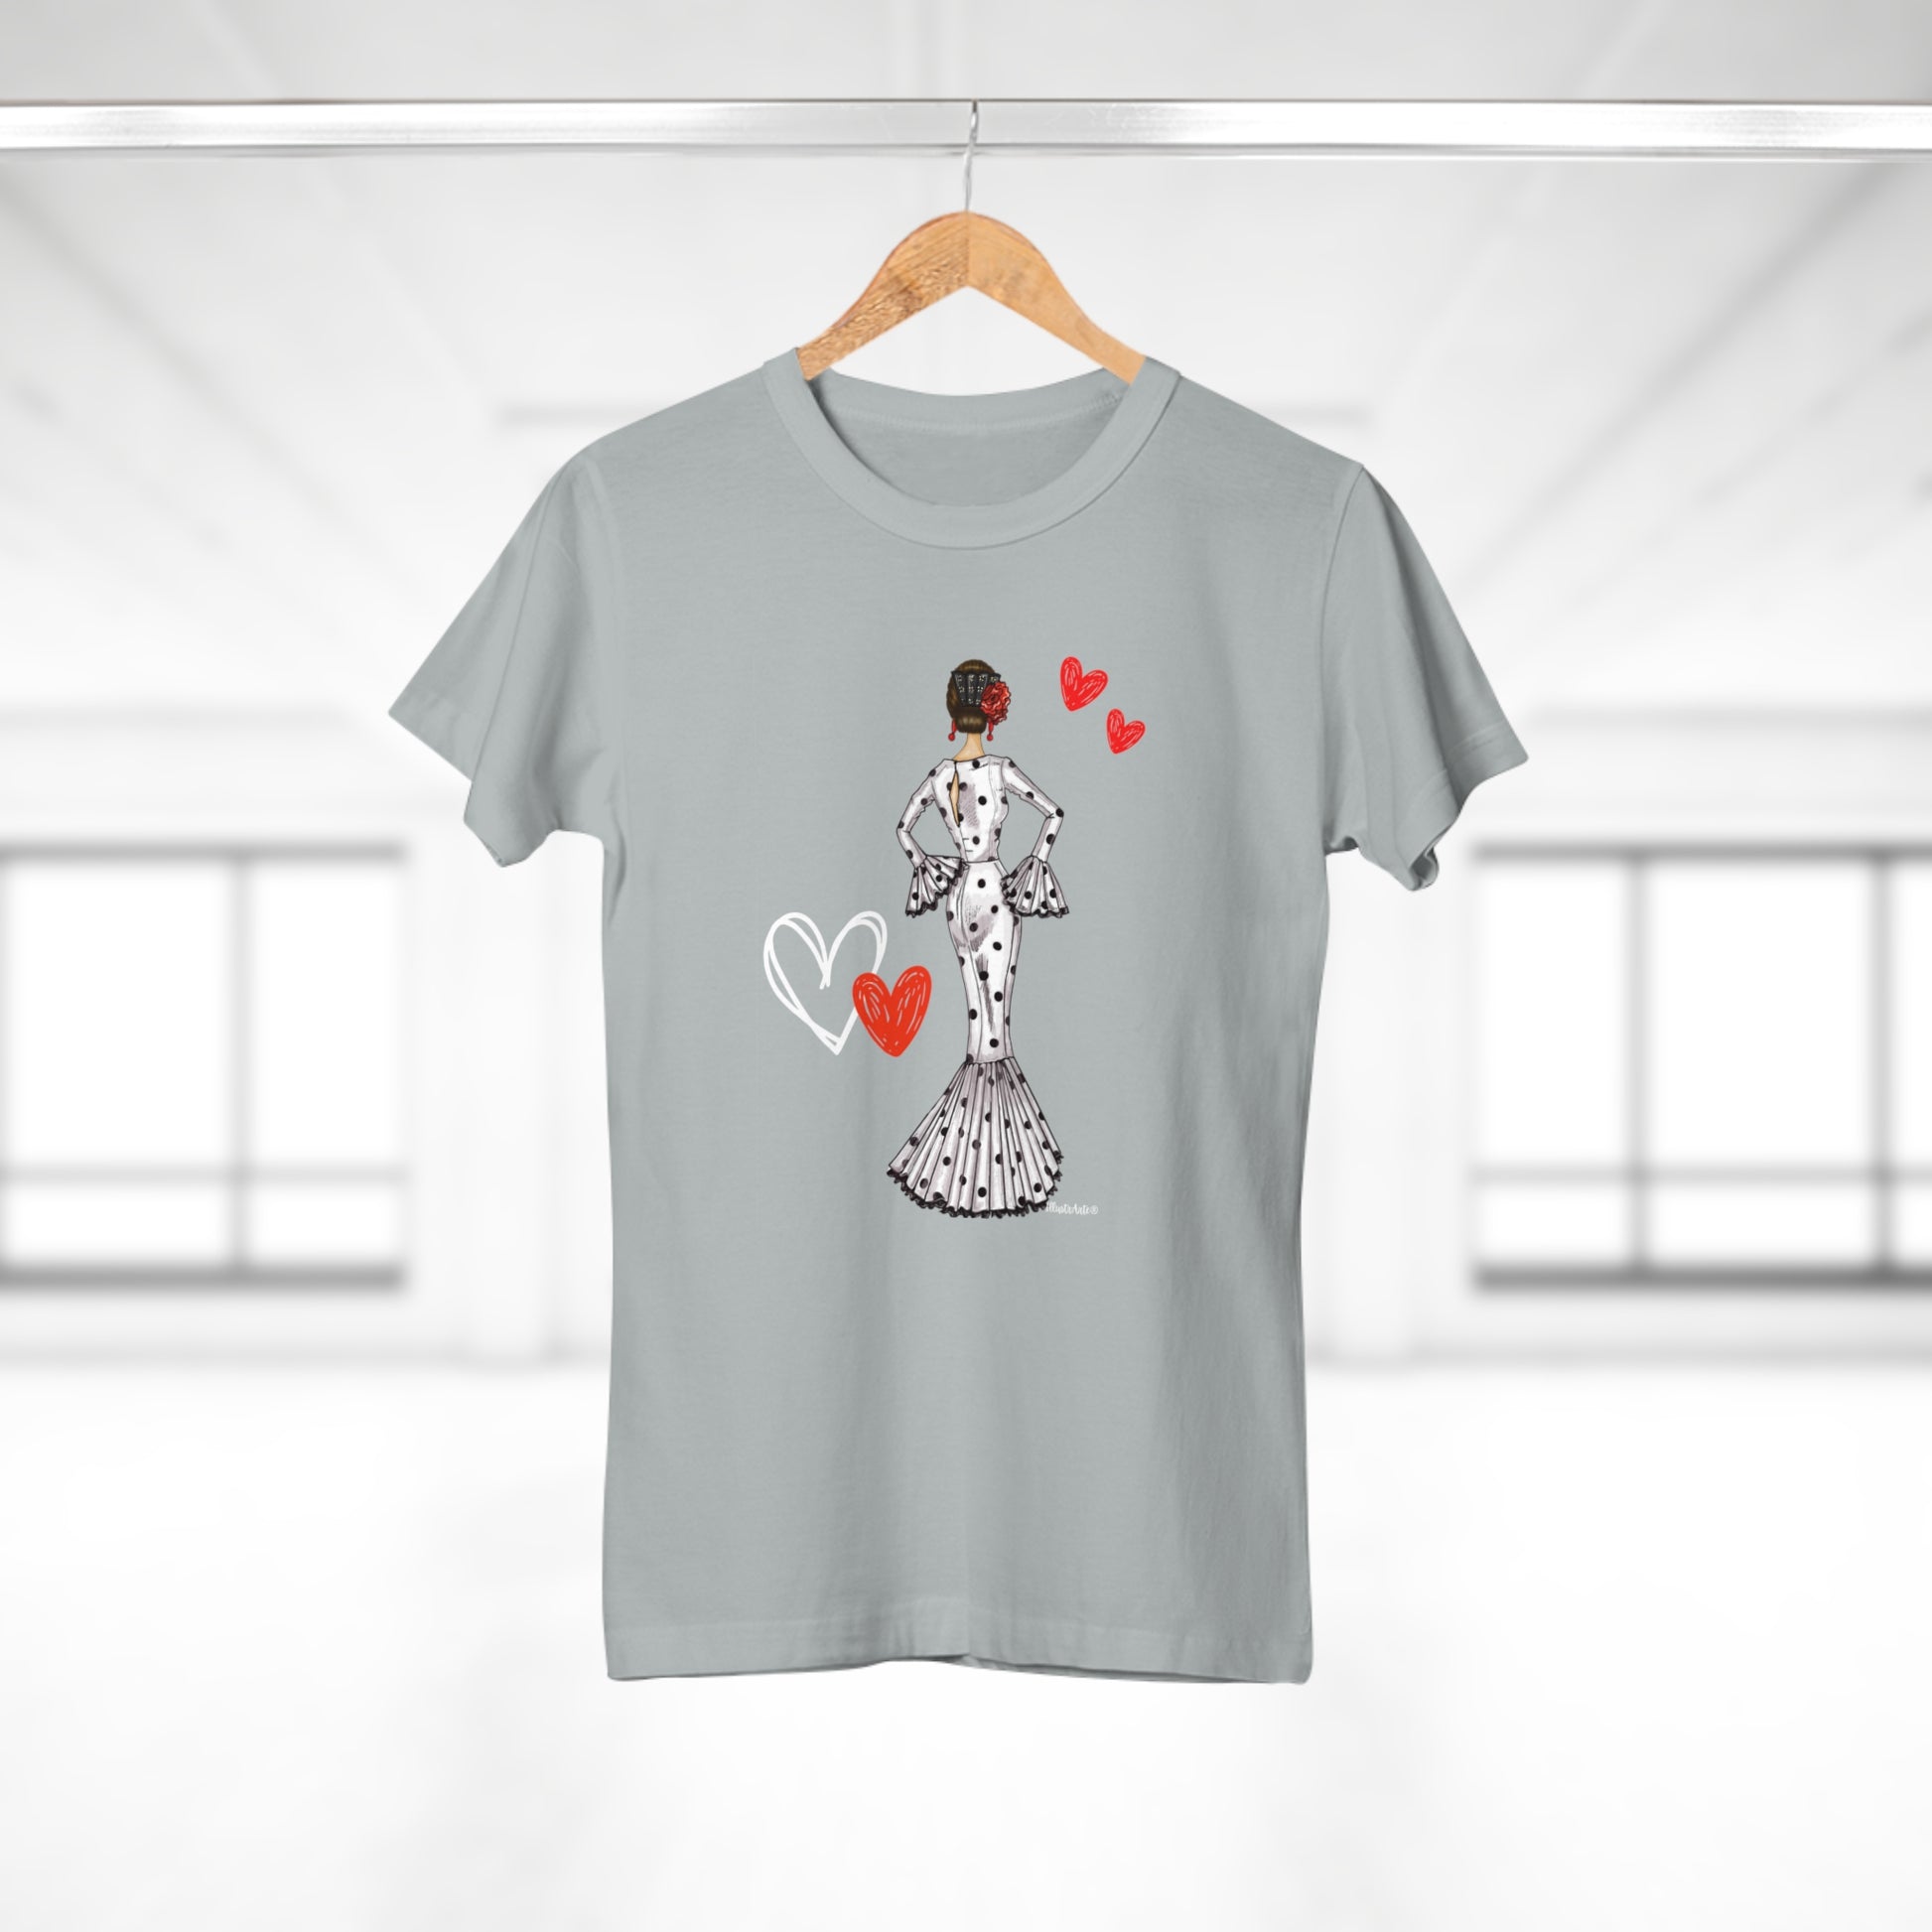 a t - shirt hanging on a clothes line with a woman in a dress and